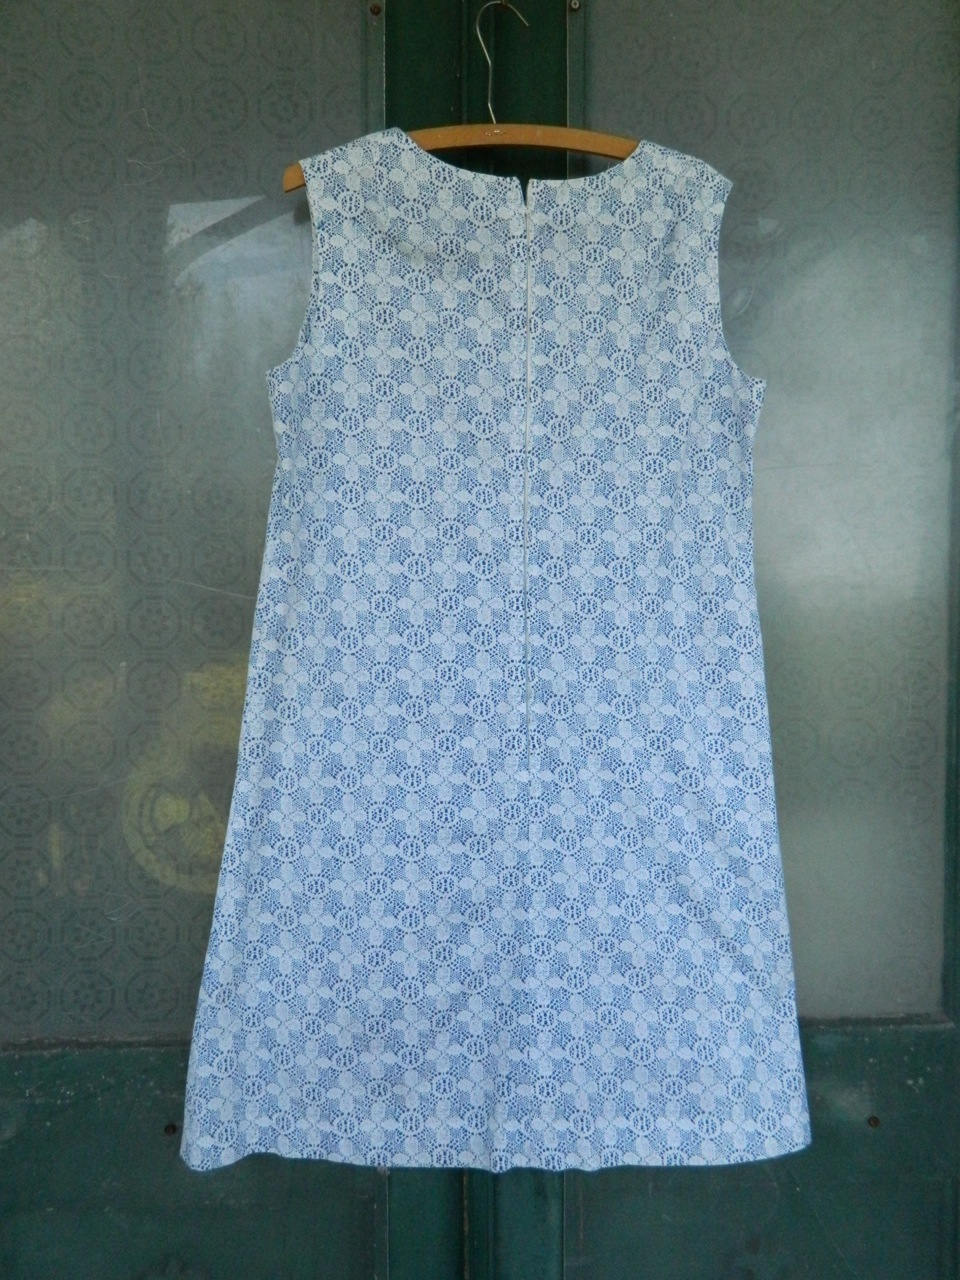 Vintage Homemade Blue and White Lace Print Sleeveless Shift Dress M/L